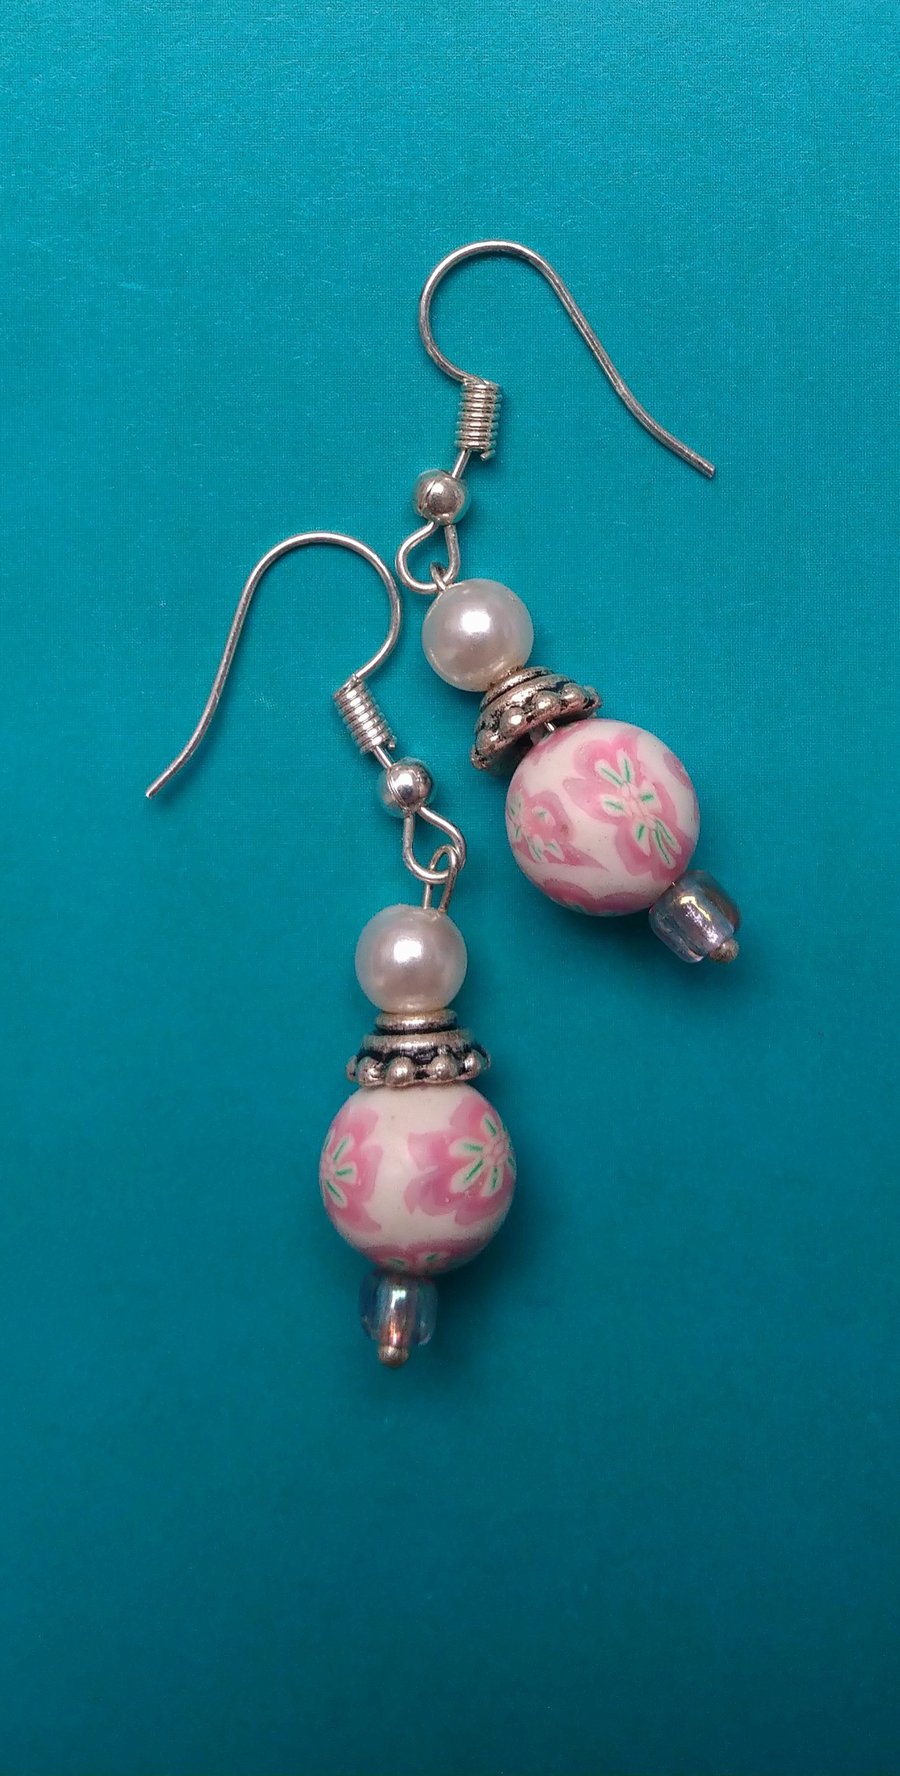 Pretty Beaded Earrings in White and Pink